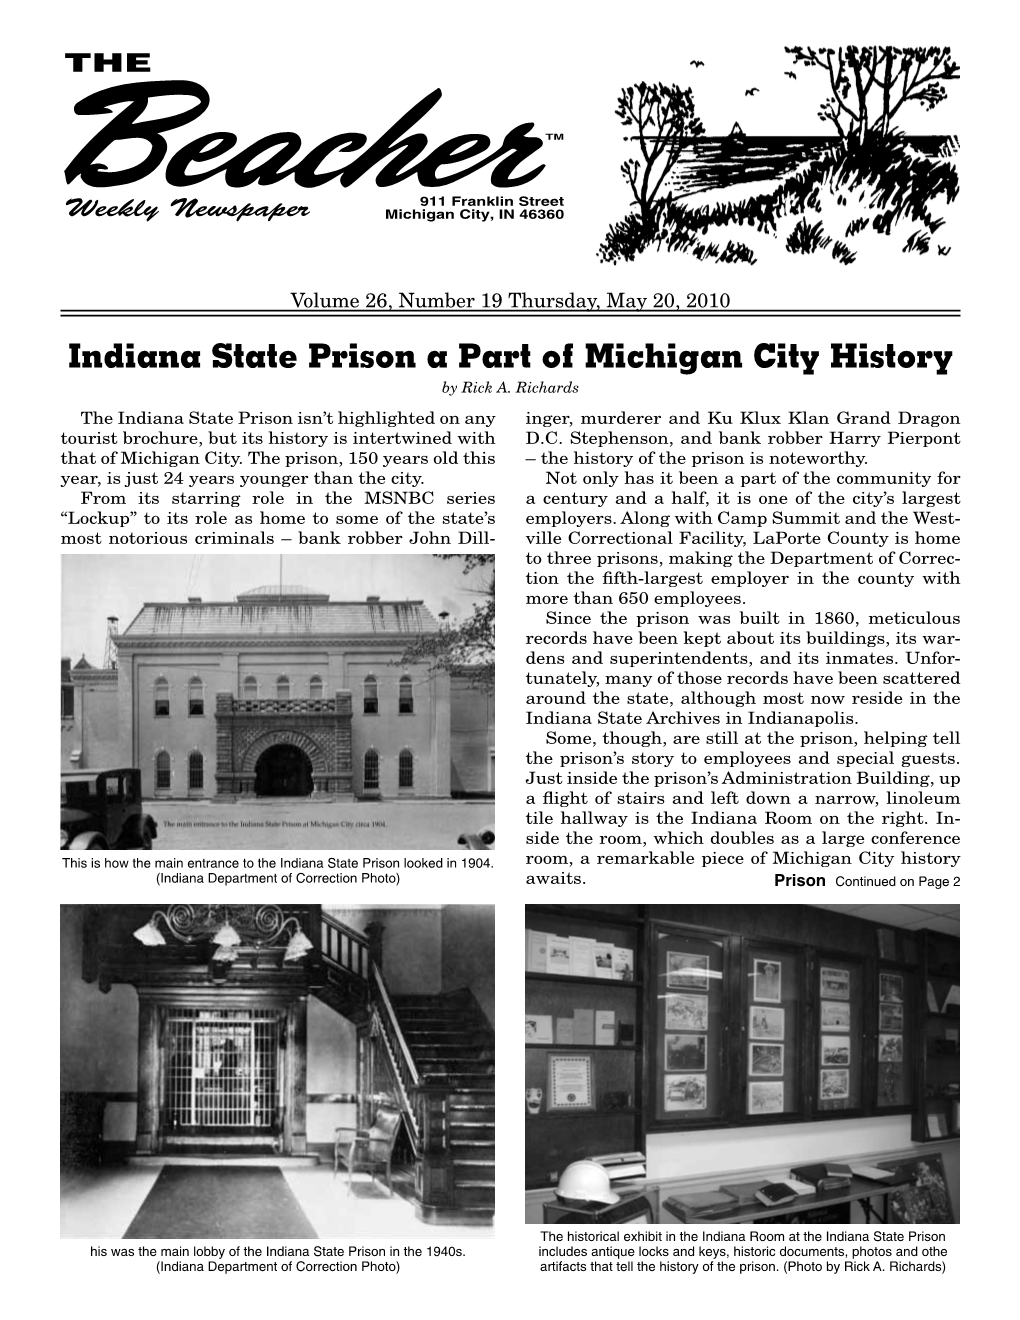 Indiana State Prison a Part of Michigan City History by Rick A